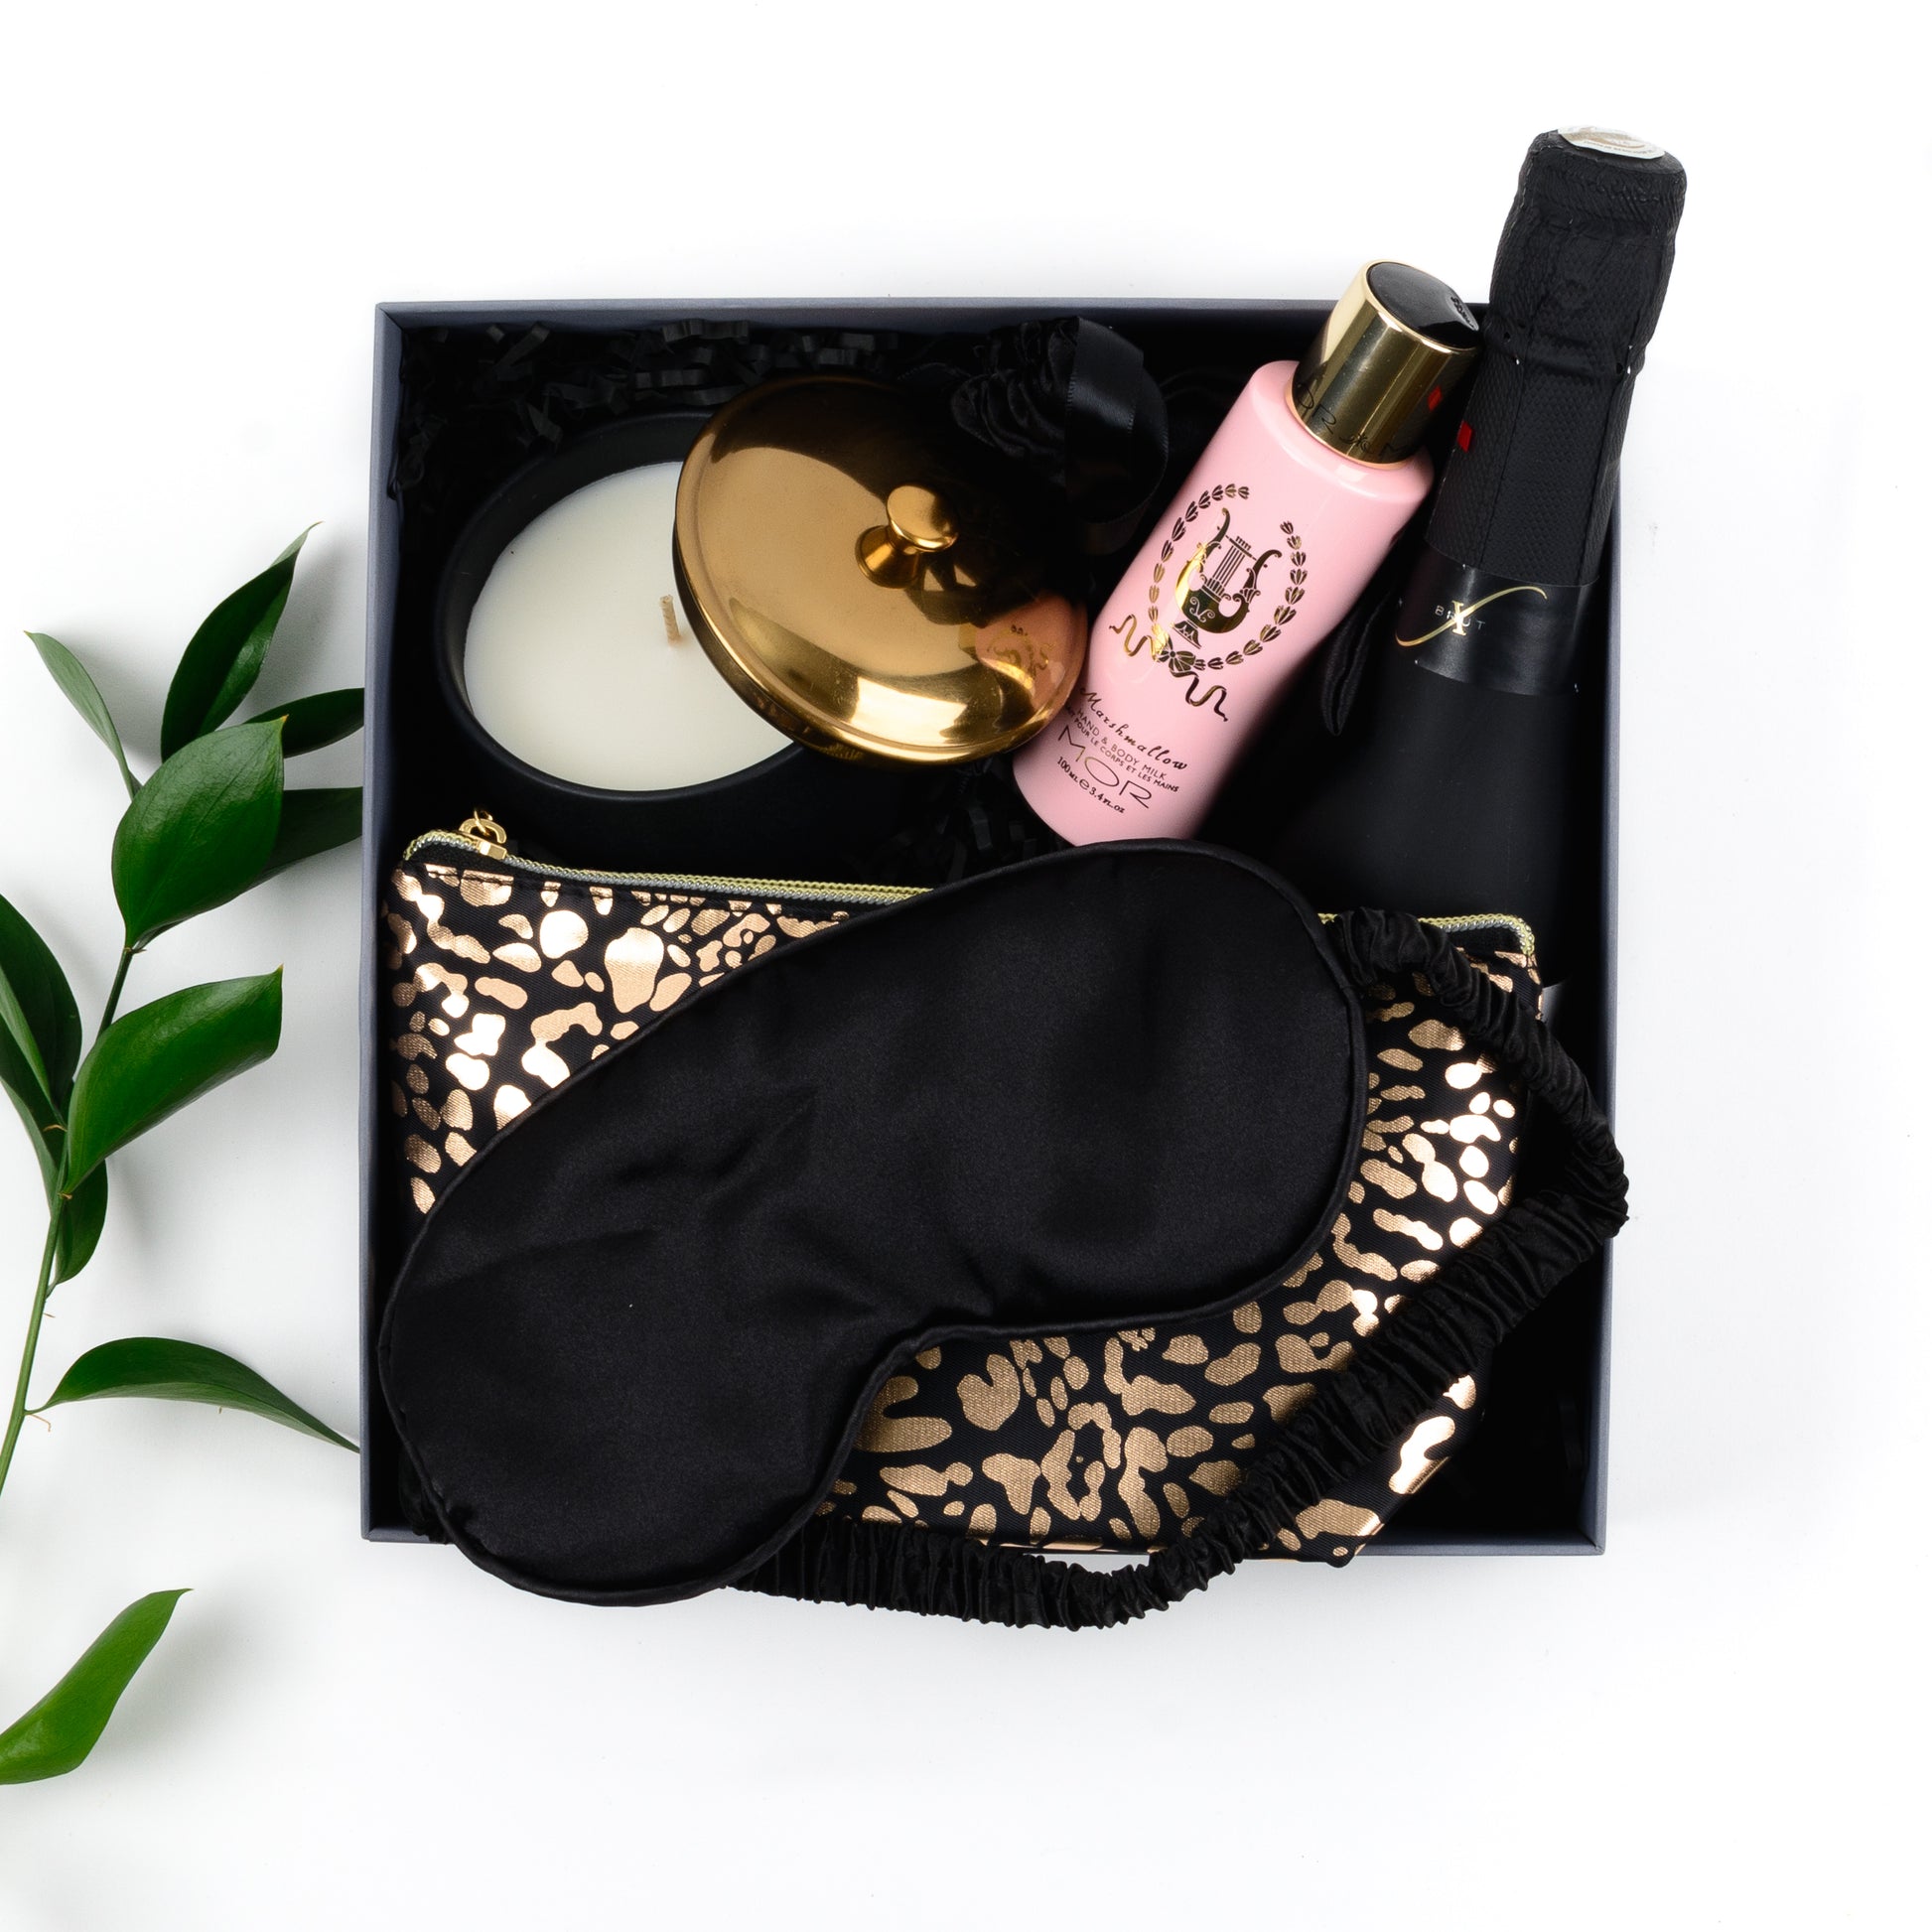 Gift box contains cosmetic purse, lotion, candle, eye mask, freixenet.